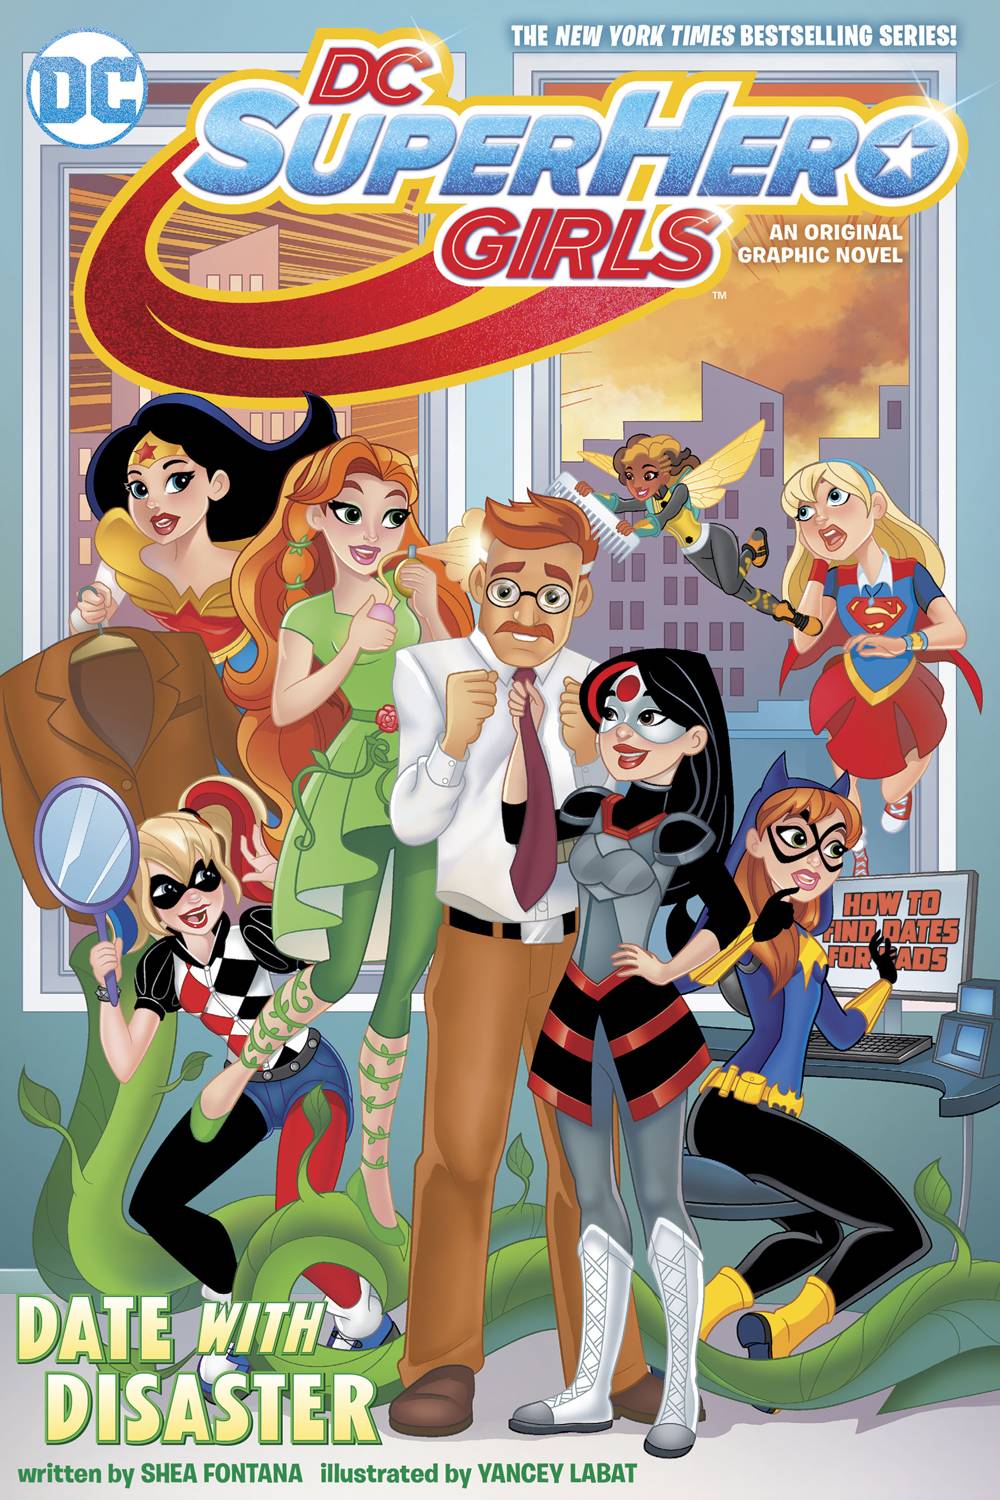 DC Super Hero Girls Date with Disaster